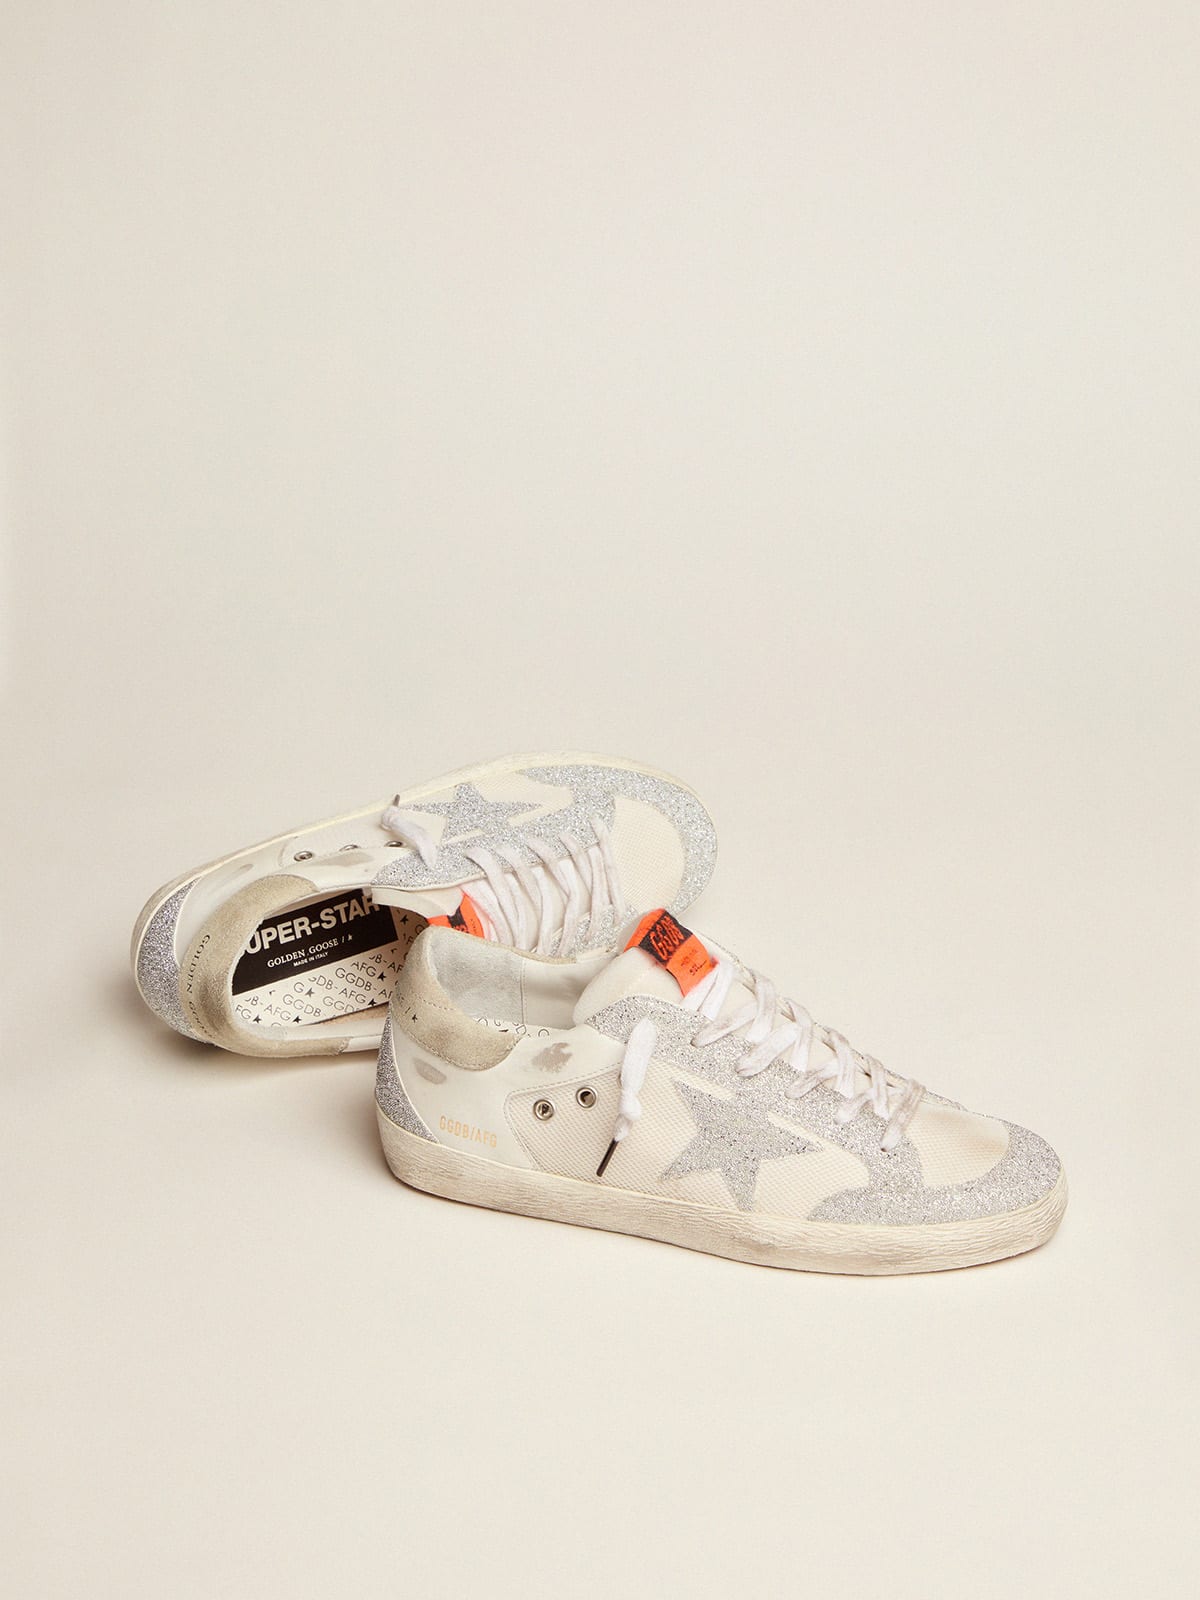 Golden Goose - Super-Star LTD sneakers in white leather and mesh with star and inserts in silver micro-crystals in 